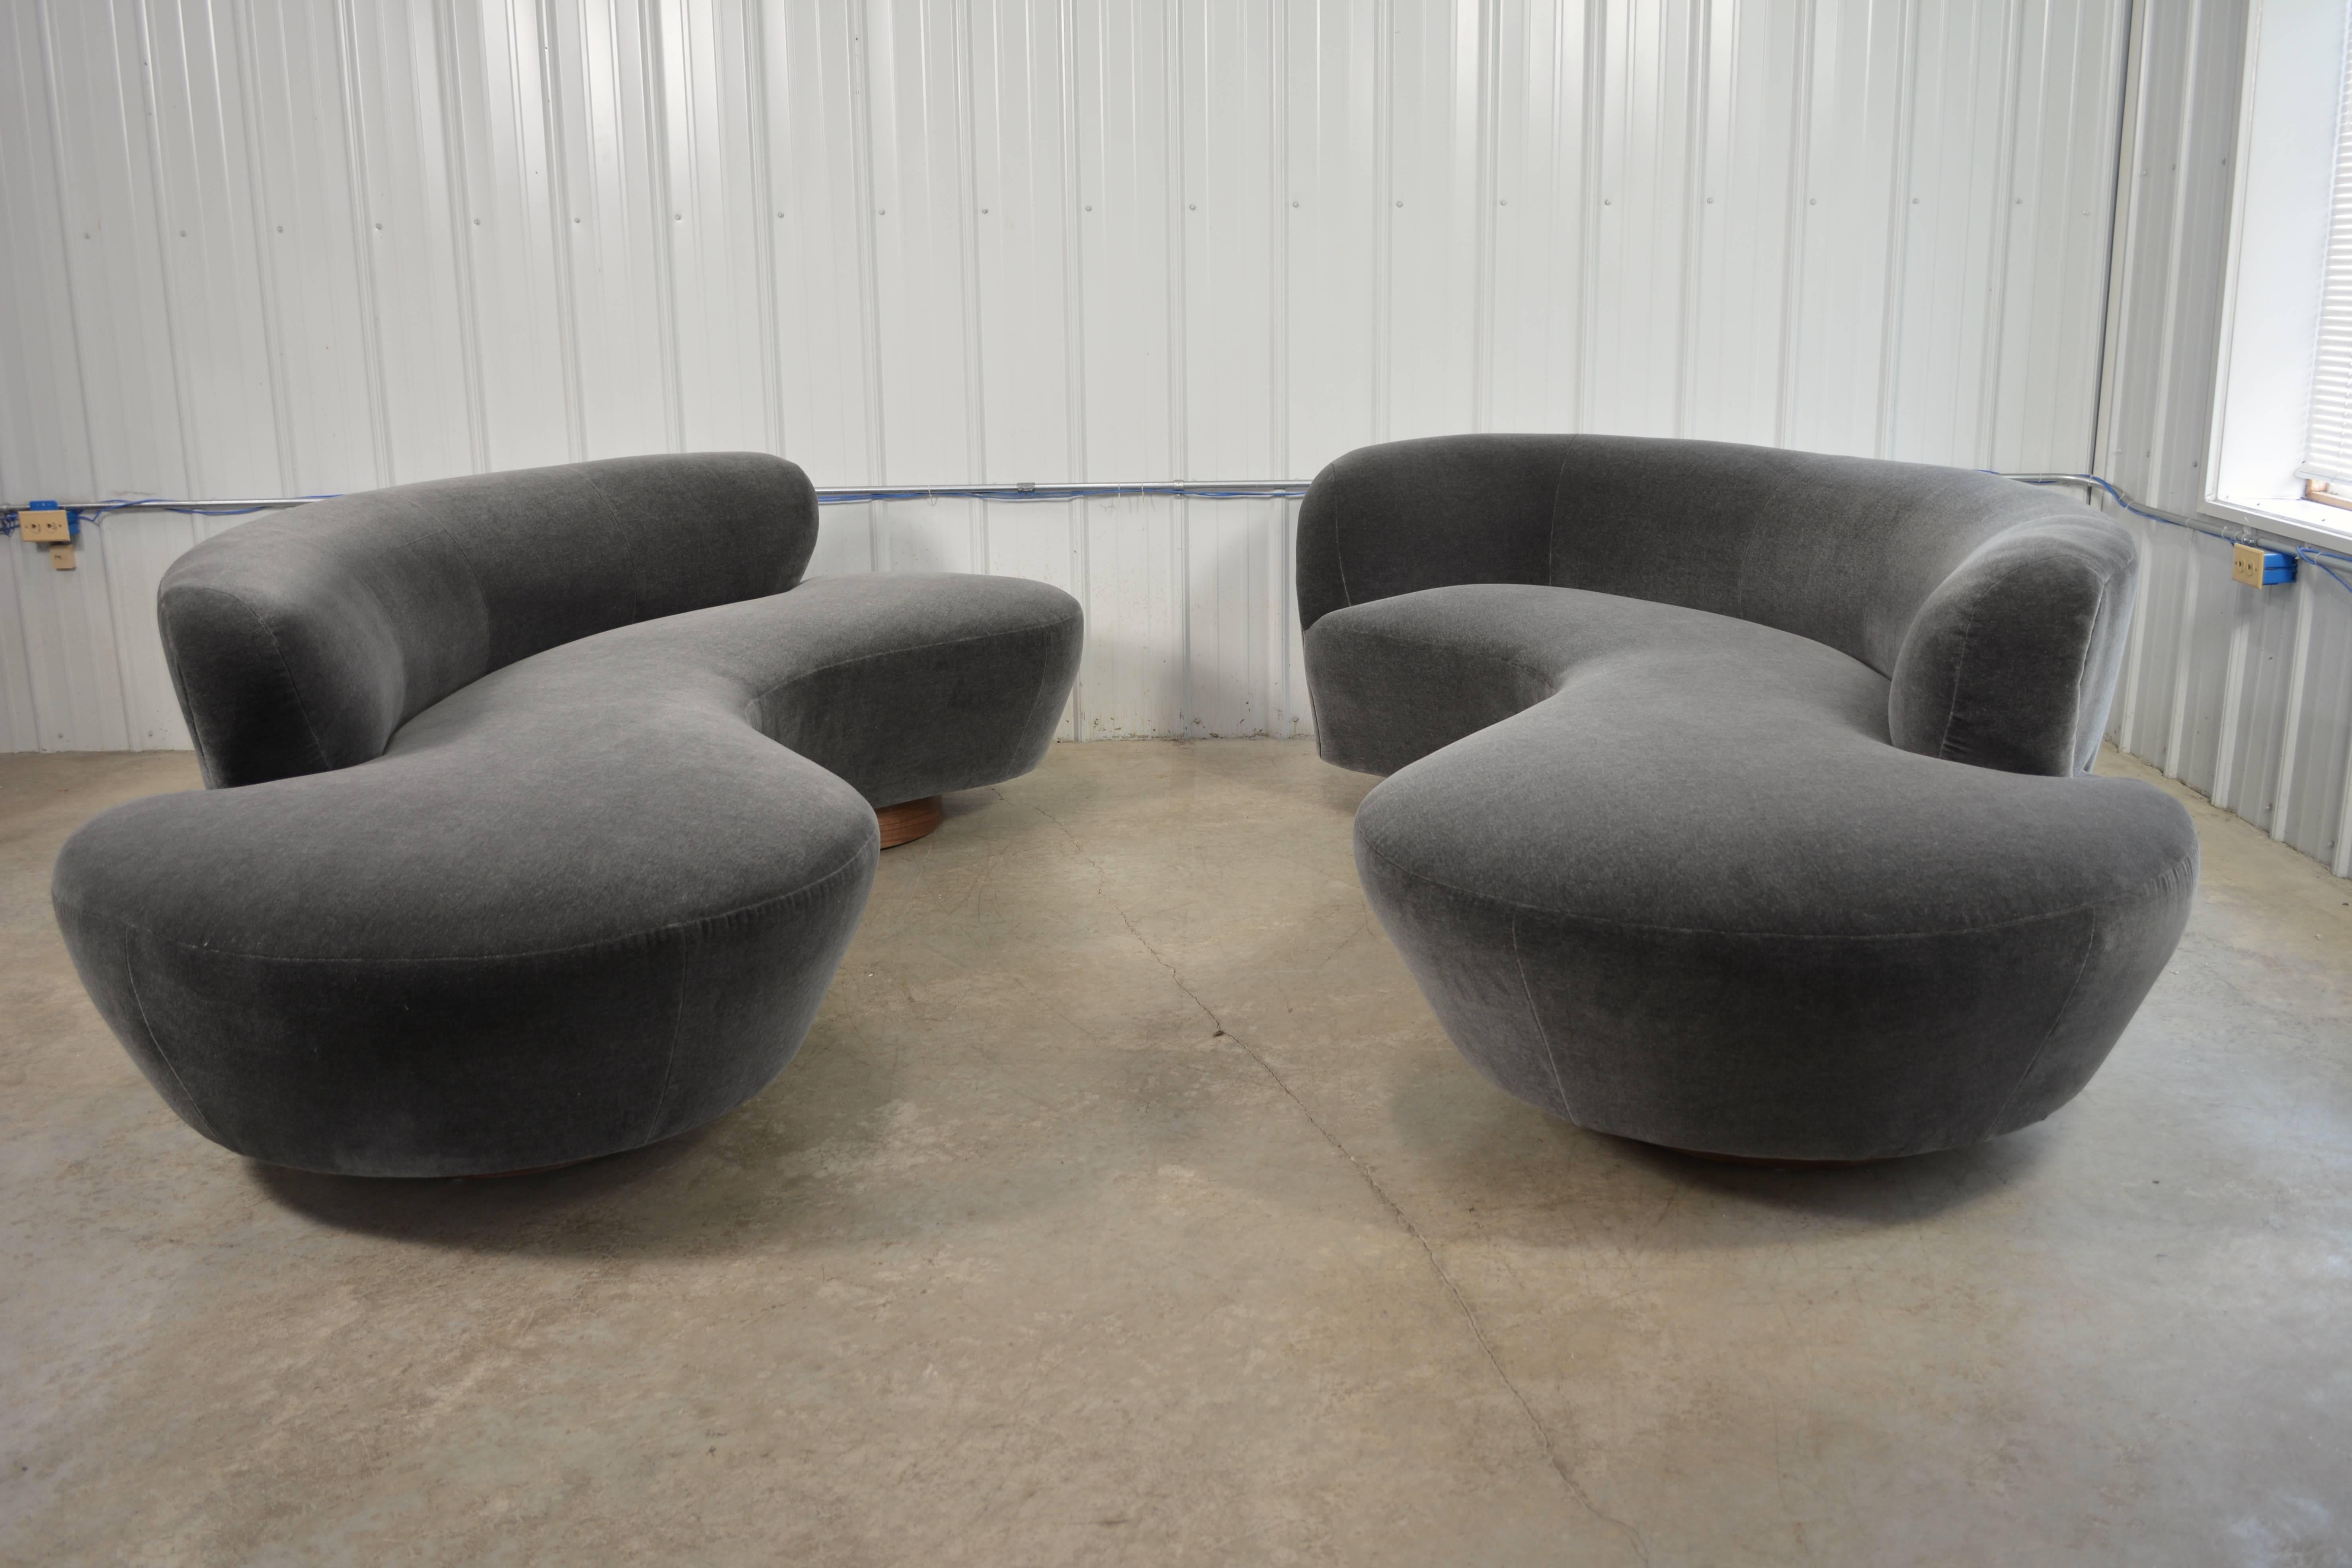 Sofa designed by Vladimir Kagan for Directional. Circular walnut plinth bases. Newly recovered in mohair. Lucite support plate. Directional label. Fabric samples available. A second sofa is available.